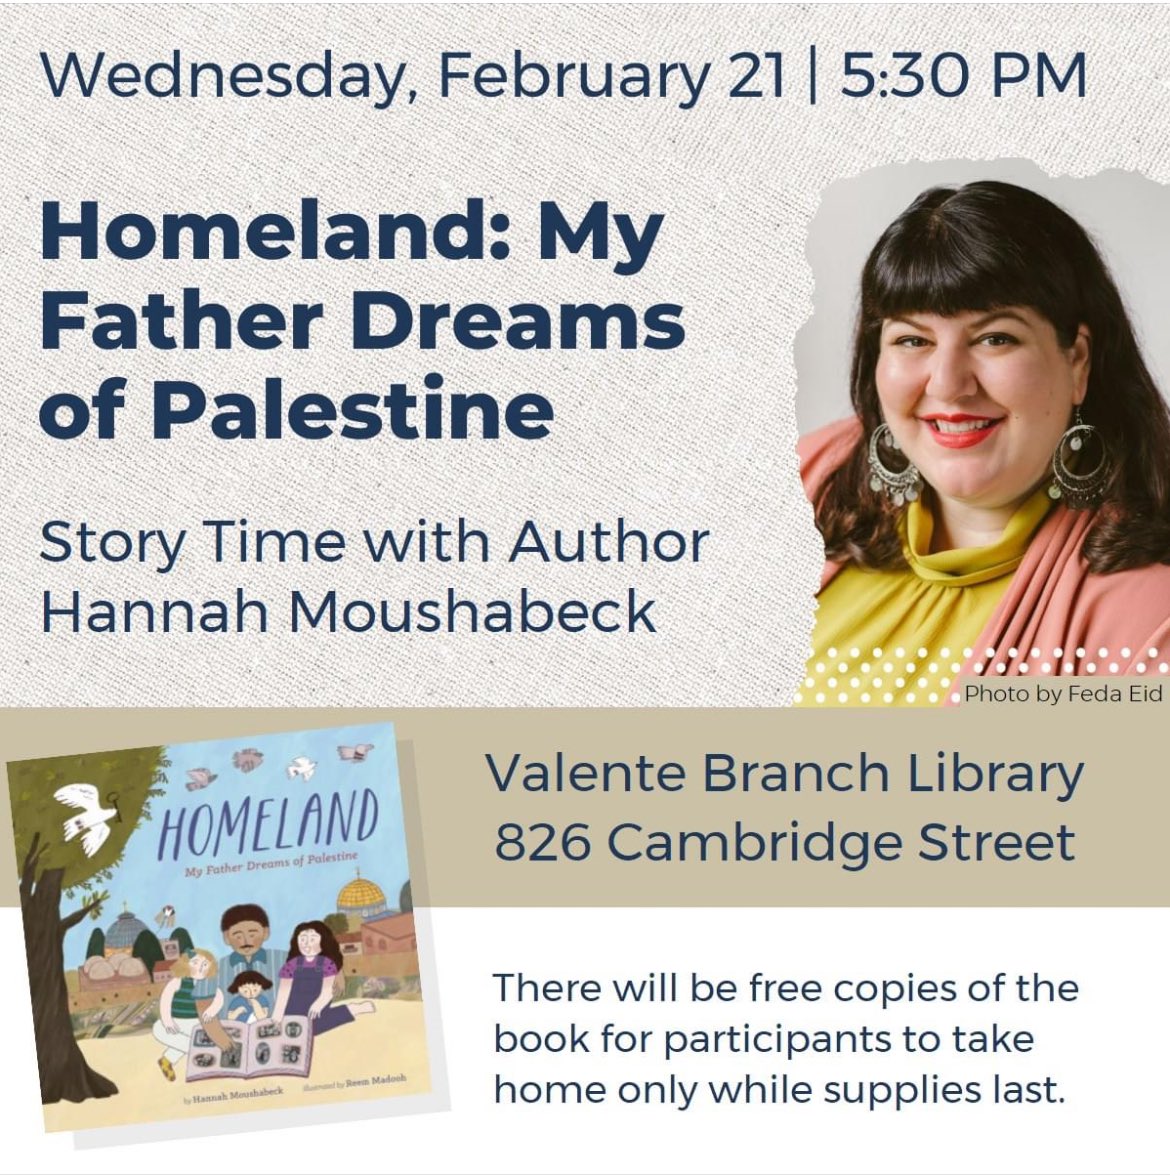 School vacation week story time and activity with Hannah Moushabeck, author of 'Homeland: My Father Dreams of Palestine.' Free copies of the book for participants while supplies last. Registration is helpful: cambridgepl.libcal.com/event/11883662 @cambridgepl @HMoushabeck